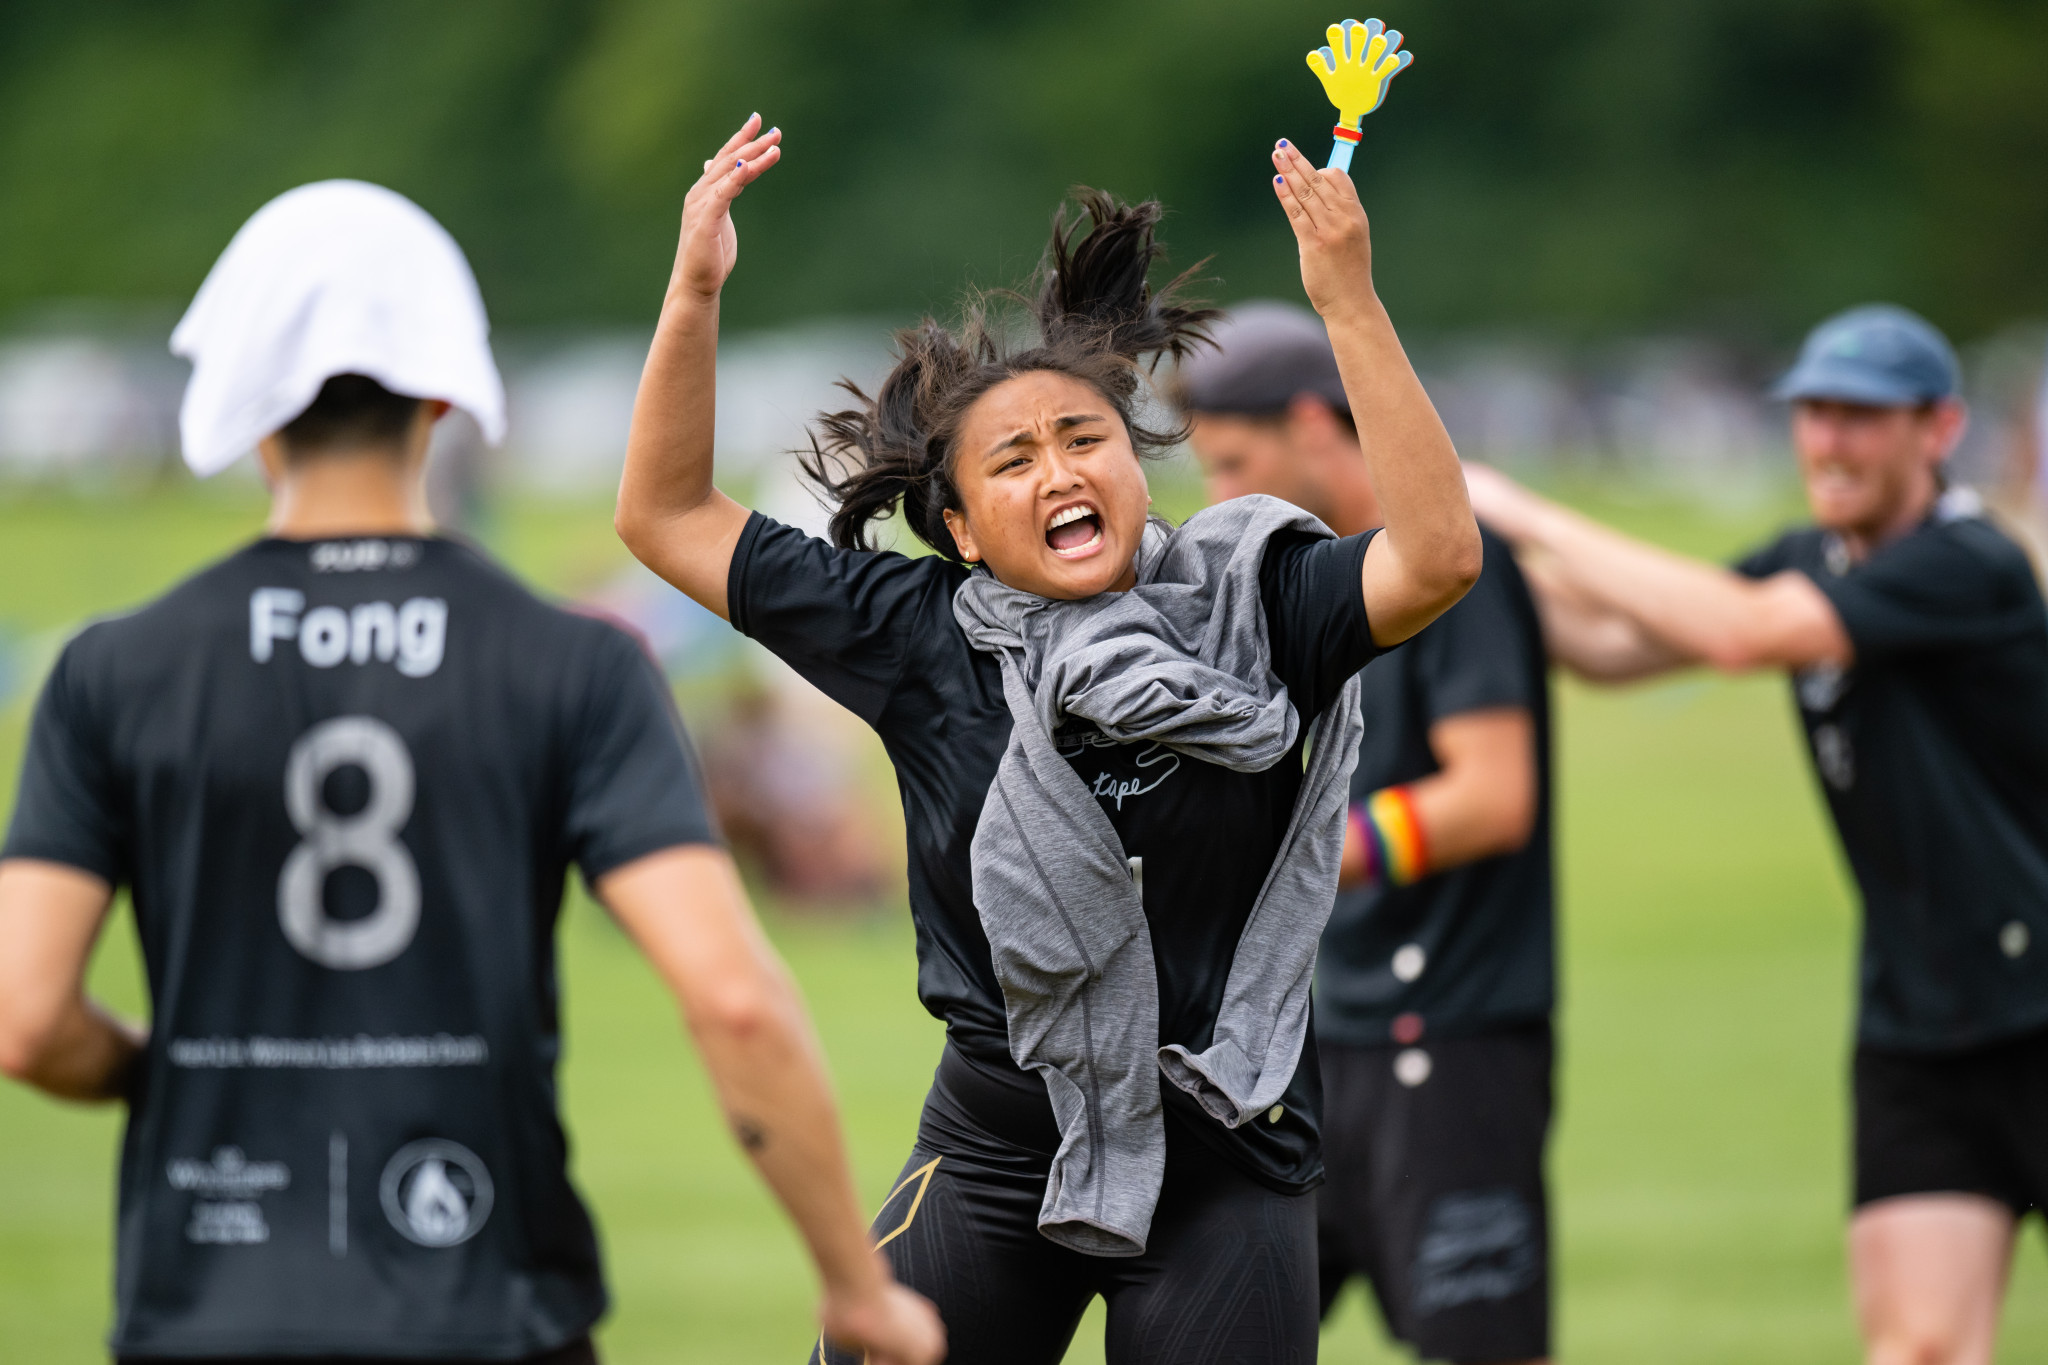 Seattle Mixtape's Ari Lozano incited her teammates to victory in their semi-final fight against Lunch Box Ultimate Club ©Samuel Hotaling for UltiPhotos